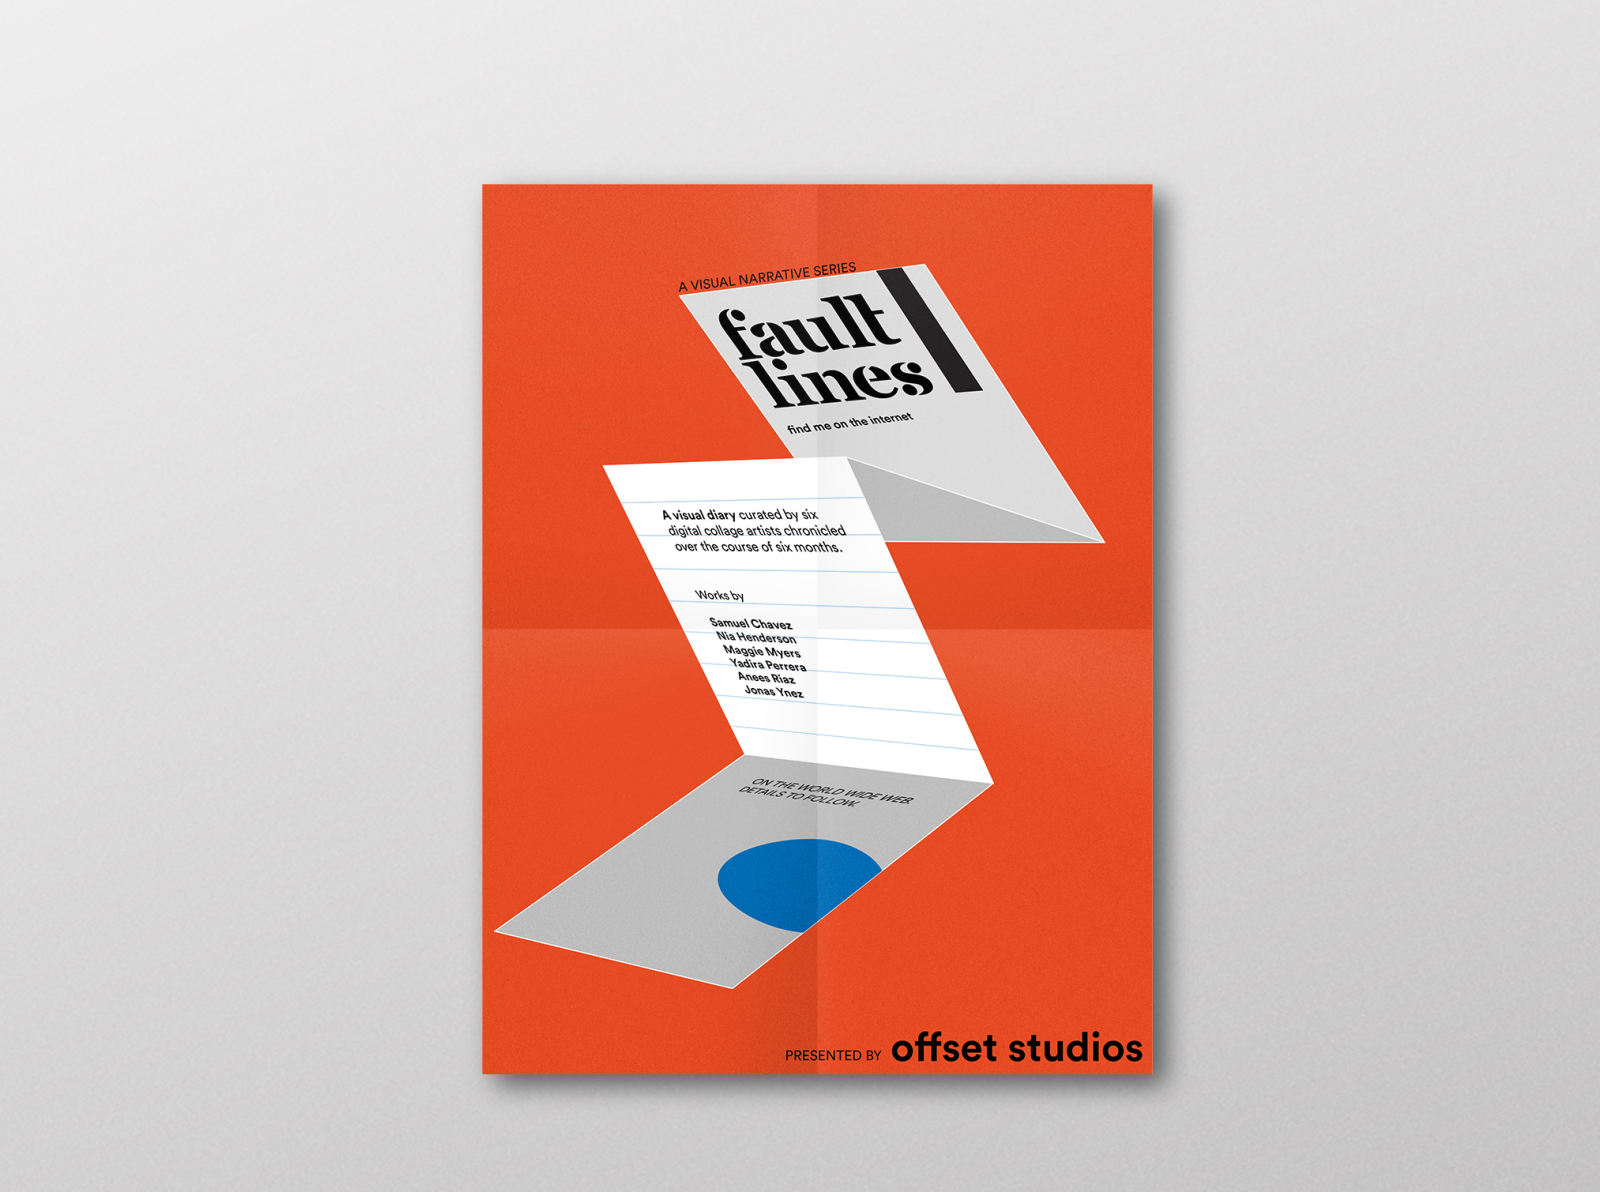 Fault Lines Poster by Naureen Meyer on Dribbble